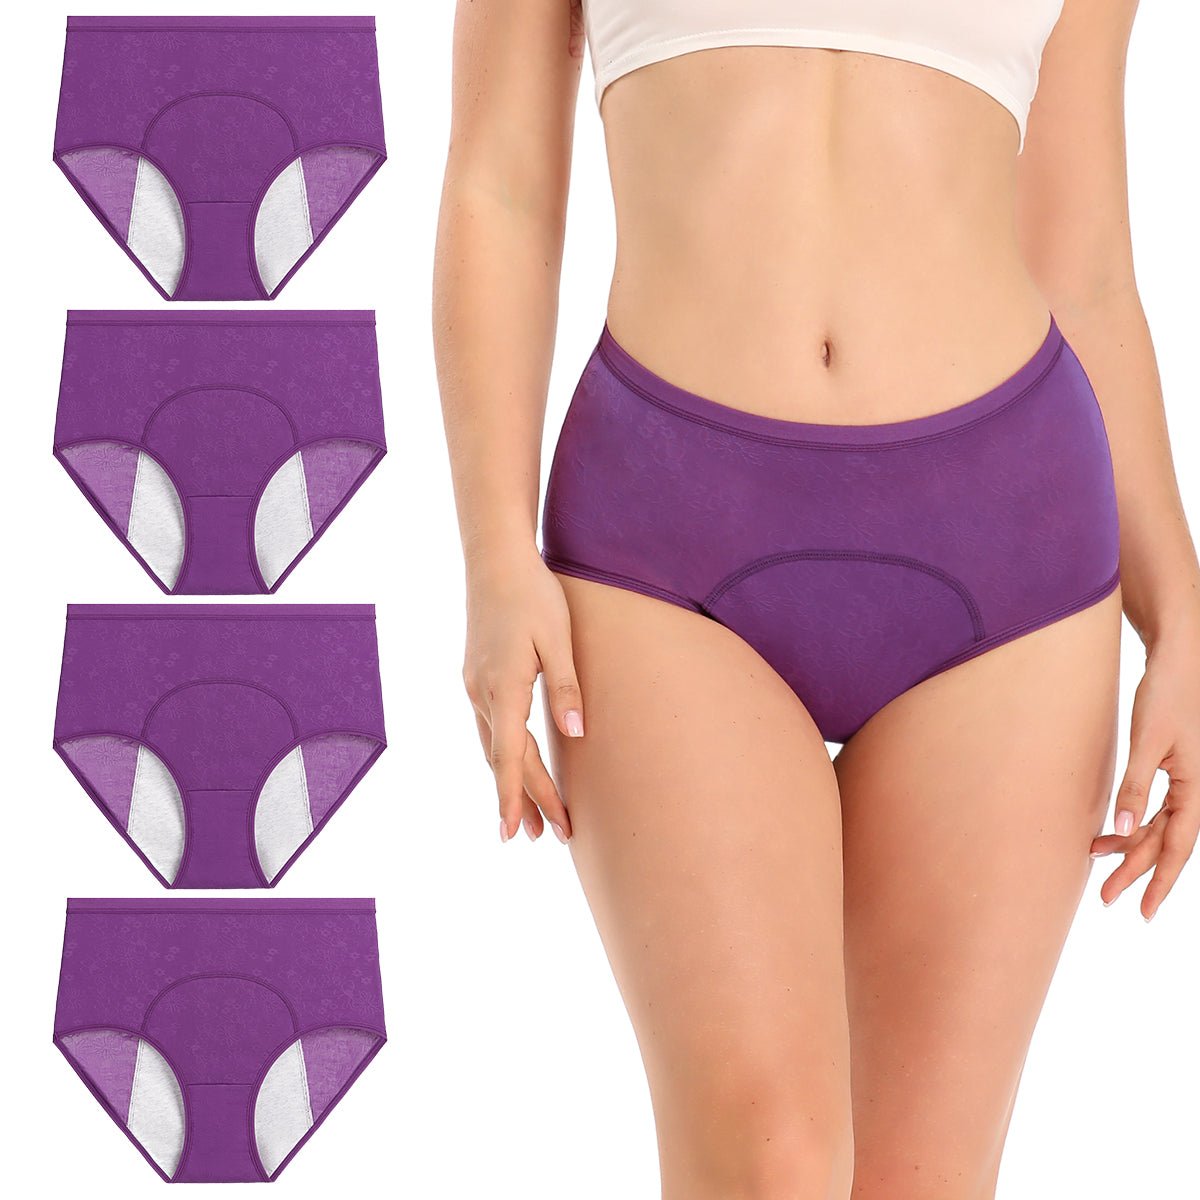 Cotton Underwear High Waisted Panties Leak Proof Full Coverage